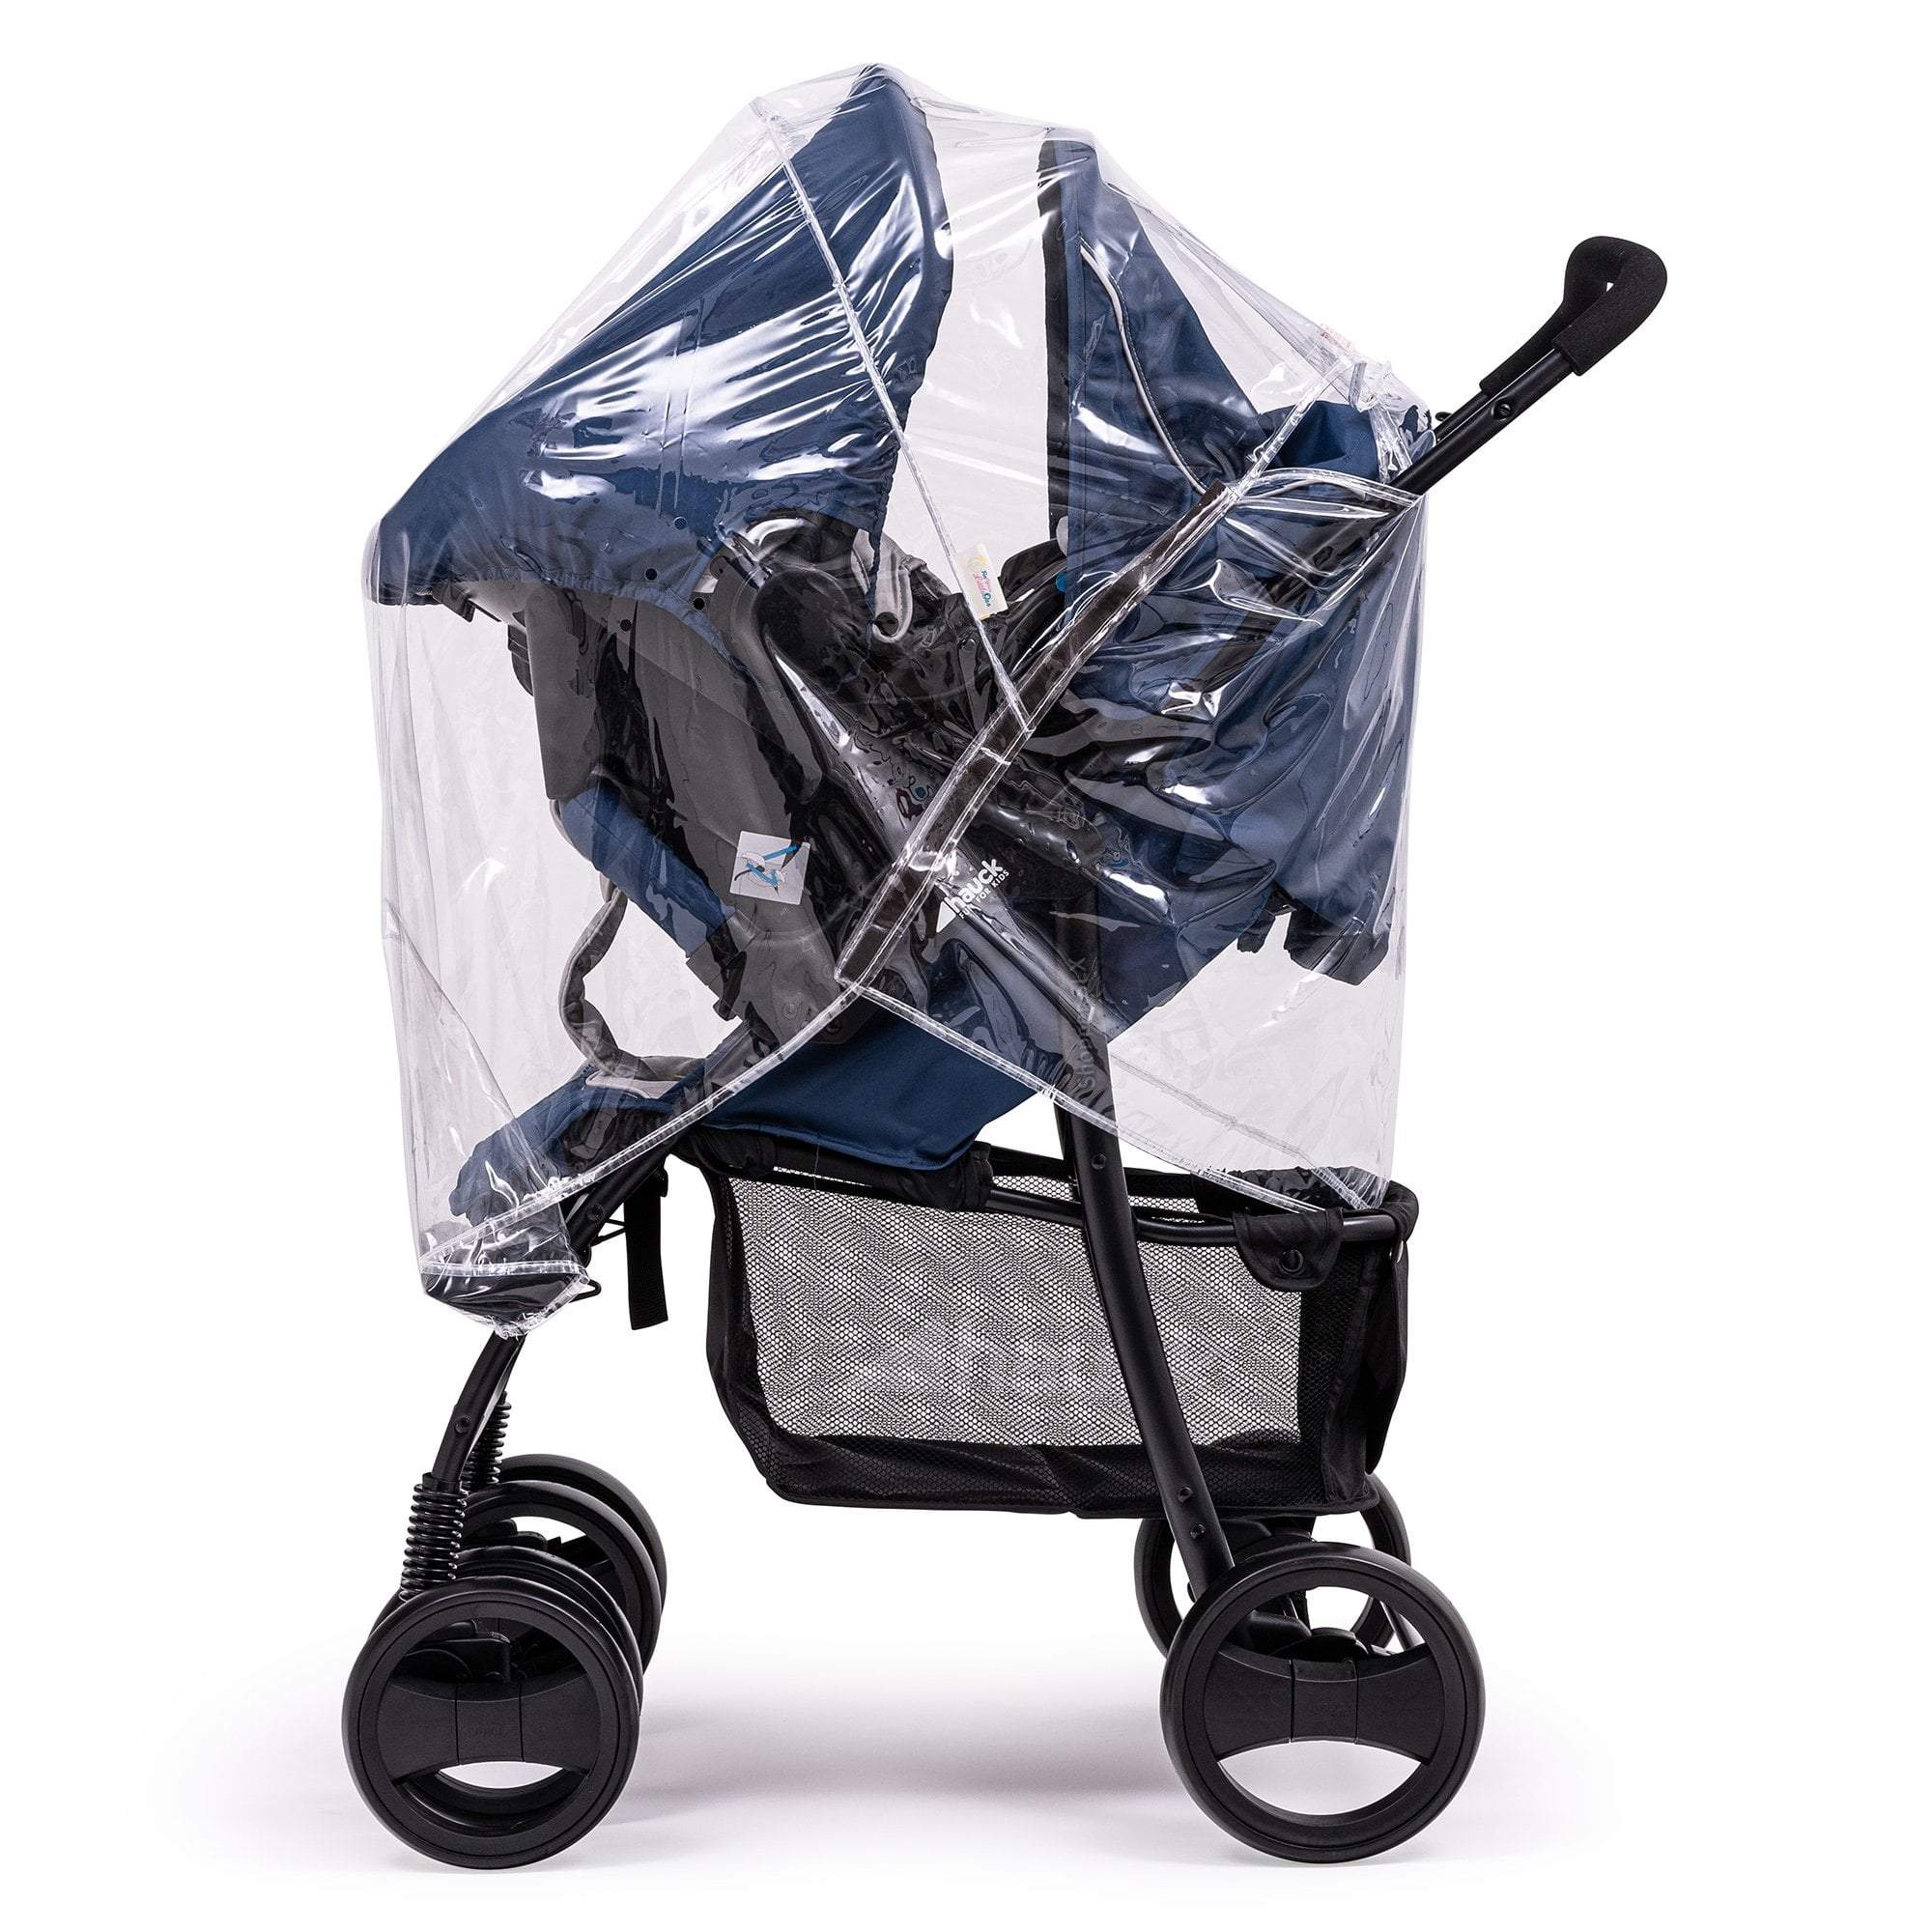 Travel System Raincover Compatible with Mountain Buggy - Fits All Models - For Your Little One